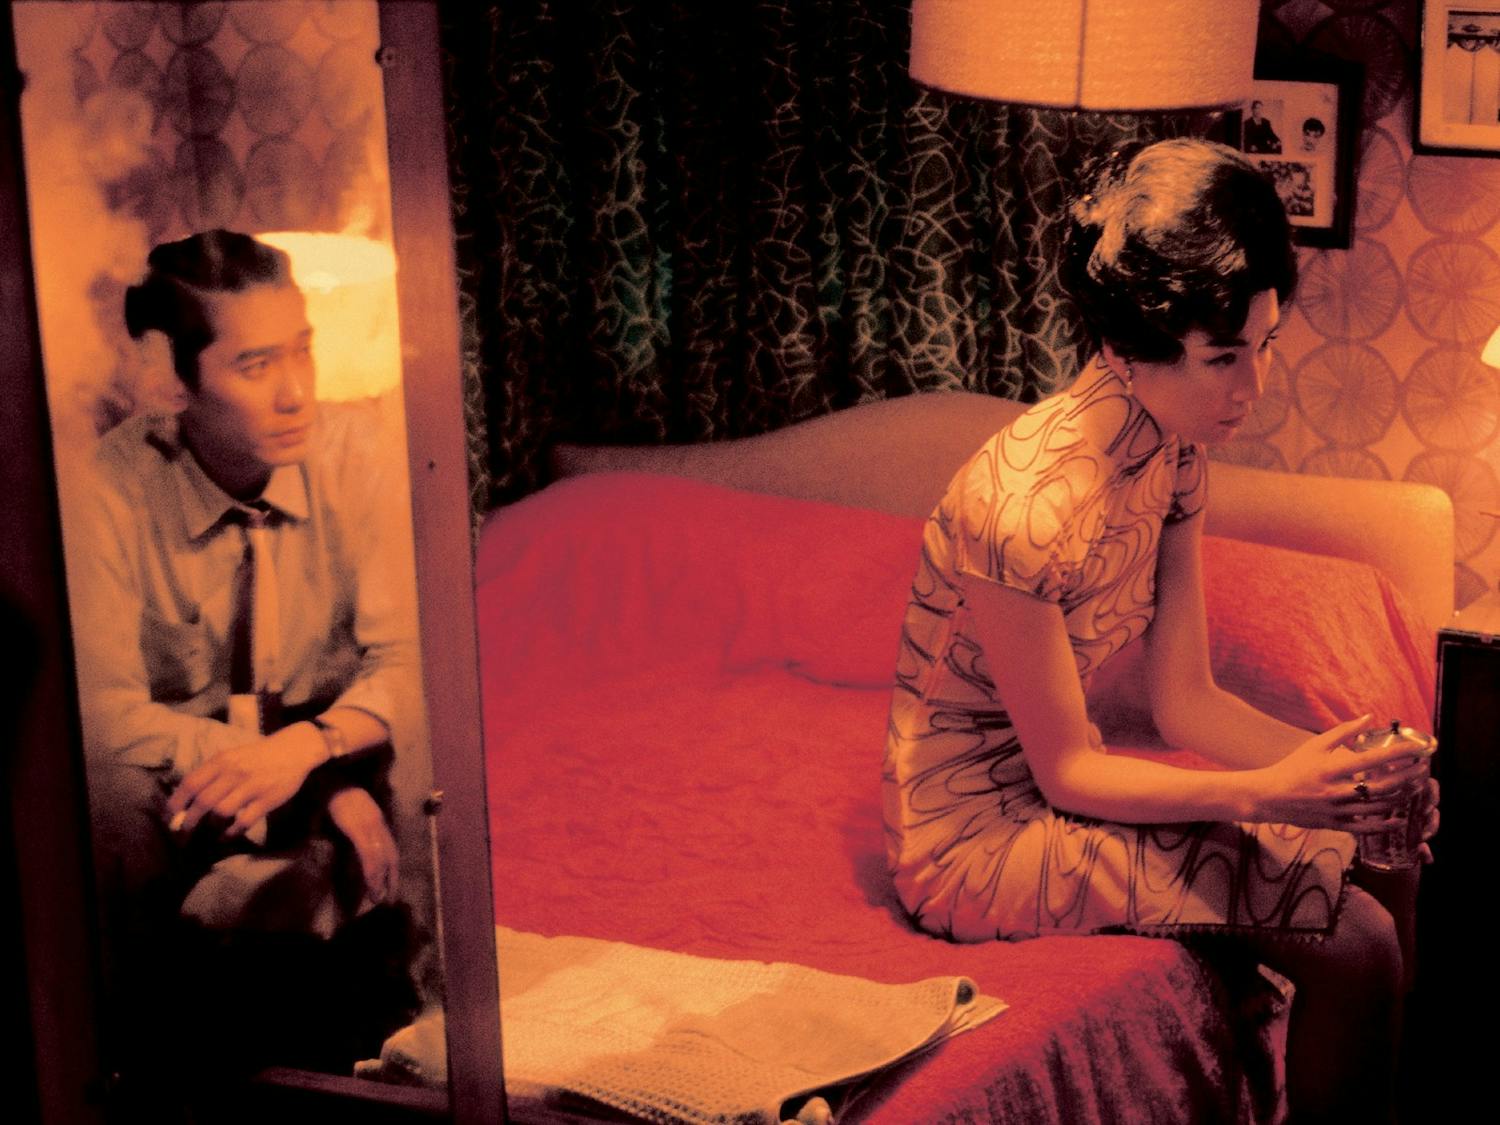 Wong Kar-wai’s 2000 film “In the Mood for Love” tells the story of a man and a woman whose spouses have an affair together and who slowly develop feelings for each other.